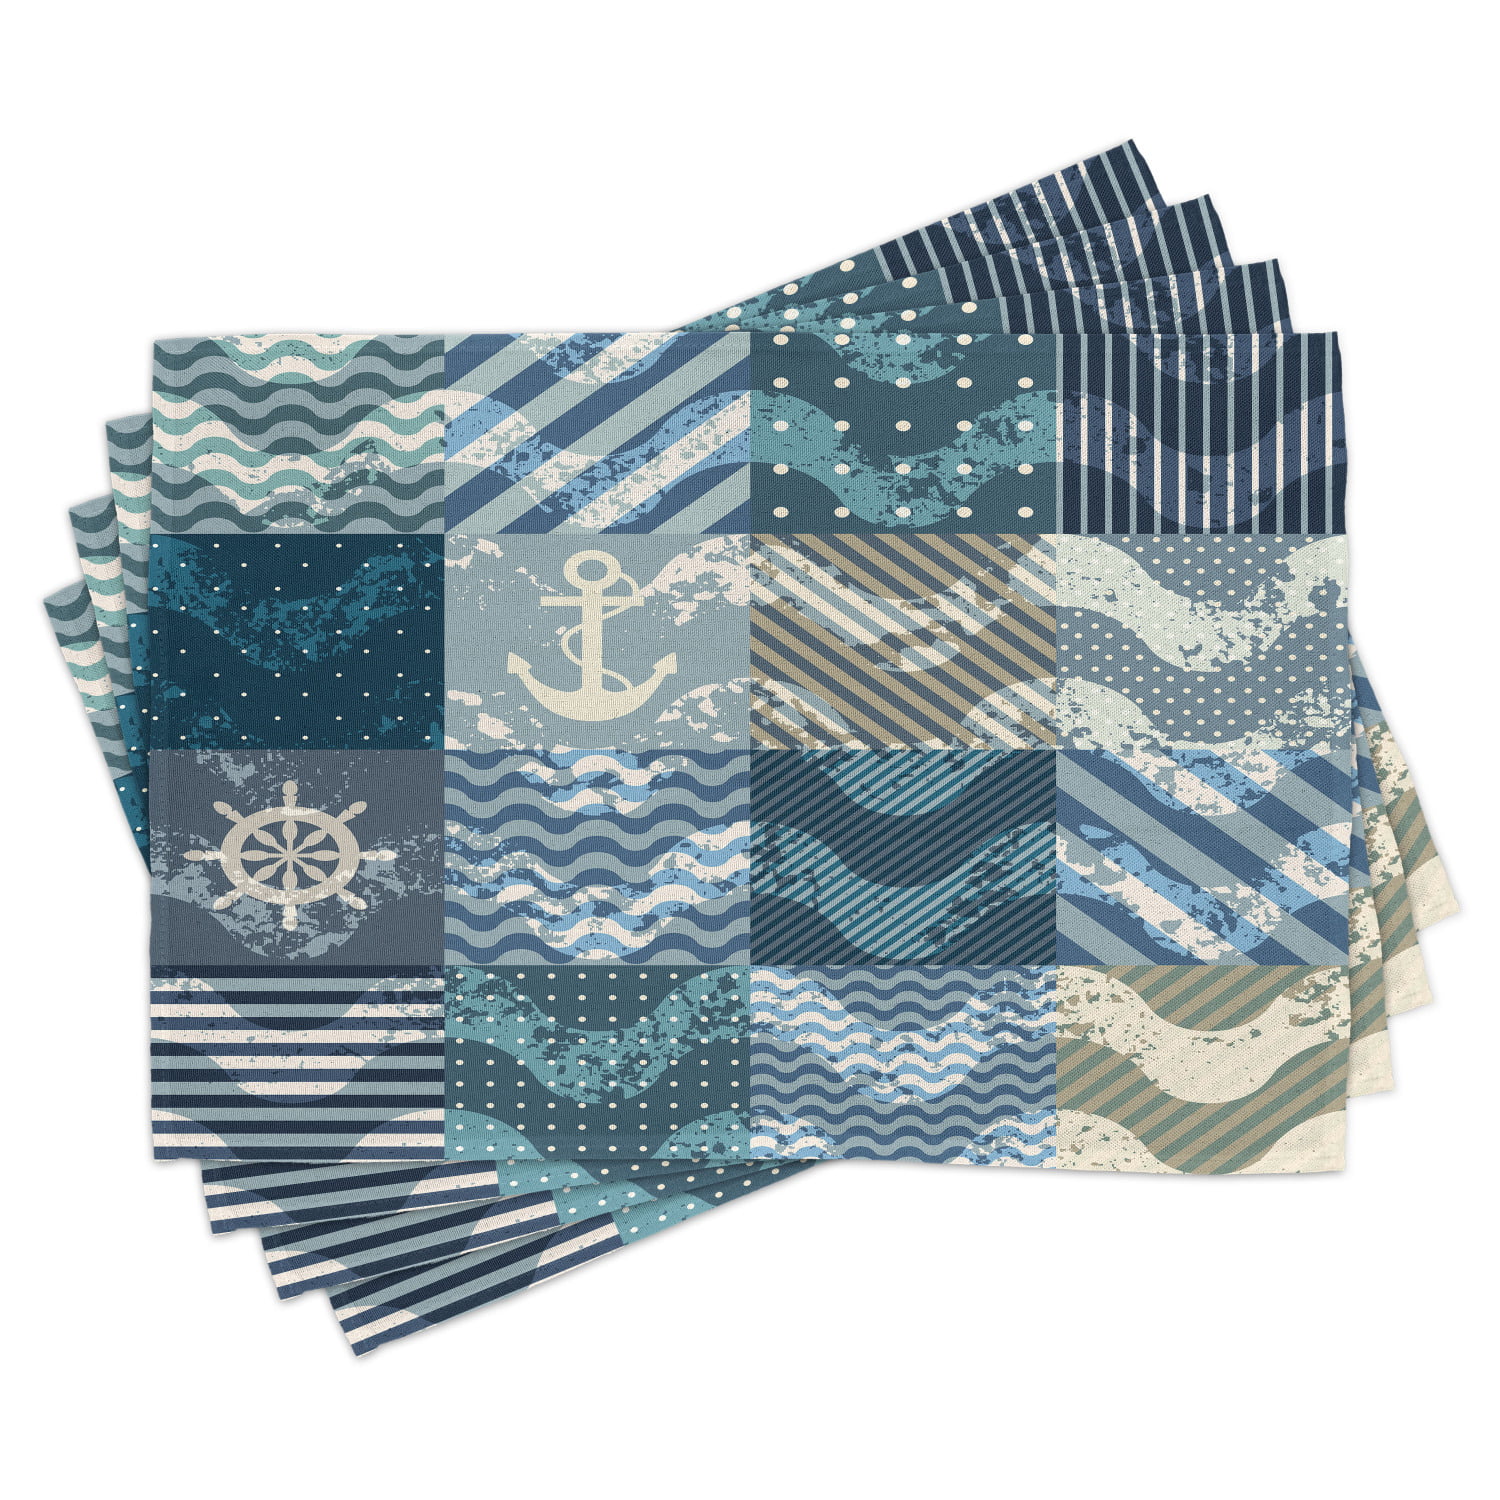 Nautical Placemats Set of 4 Marine Theme Wave Patterns in Patchwork Style Boxes Squares Striped Anchor Print, Washable Fabric Place Mats for Dining Room Kitchen Table Beige, by Ambesonne - Walmart.com